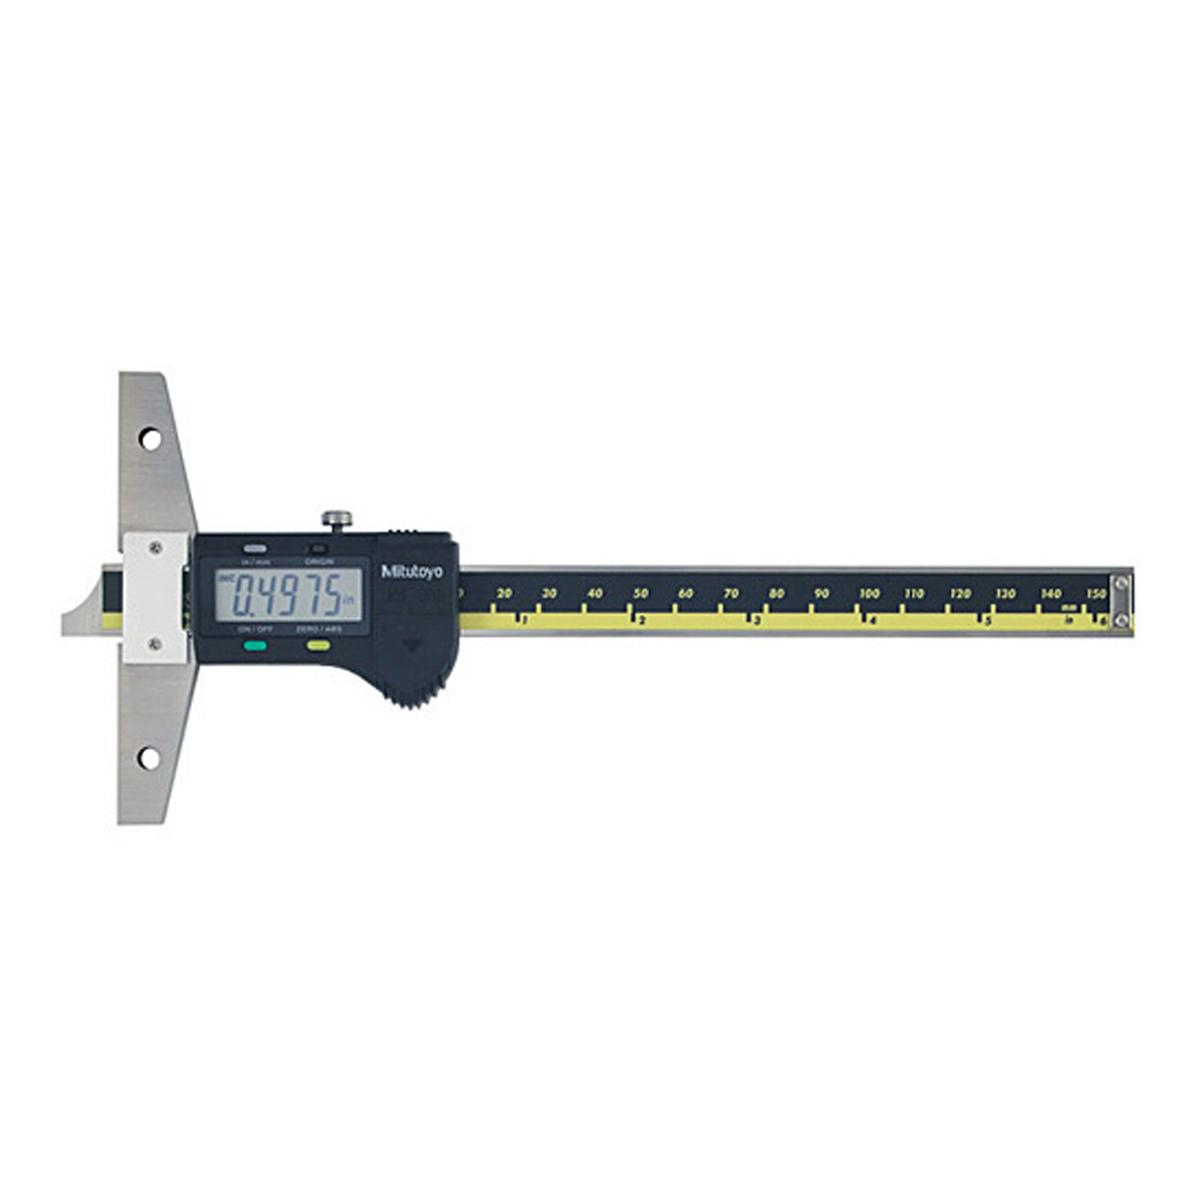 Mitutoyo Absolute Digimatic Depth Gage Series 571 | Mitutoyo by KHM Megatools Corp.